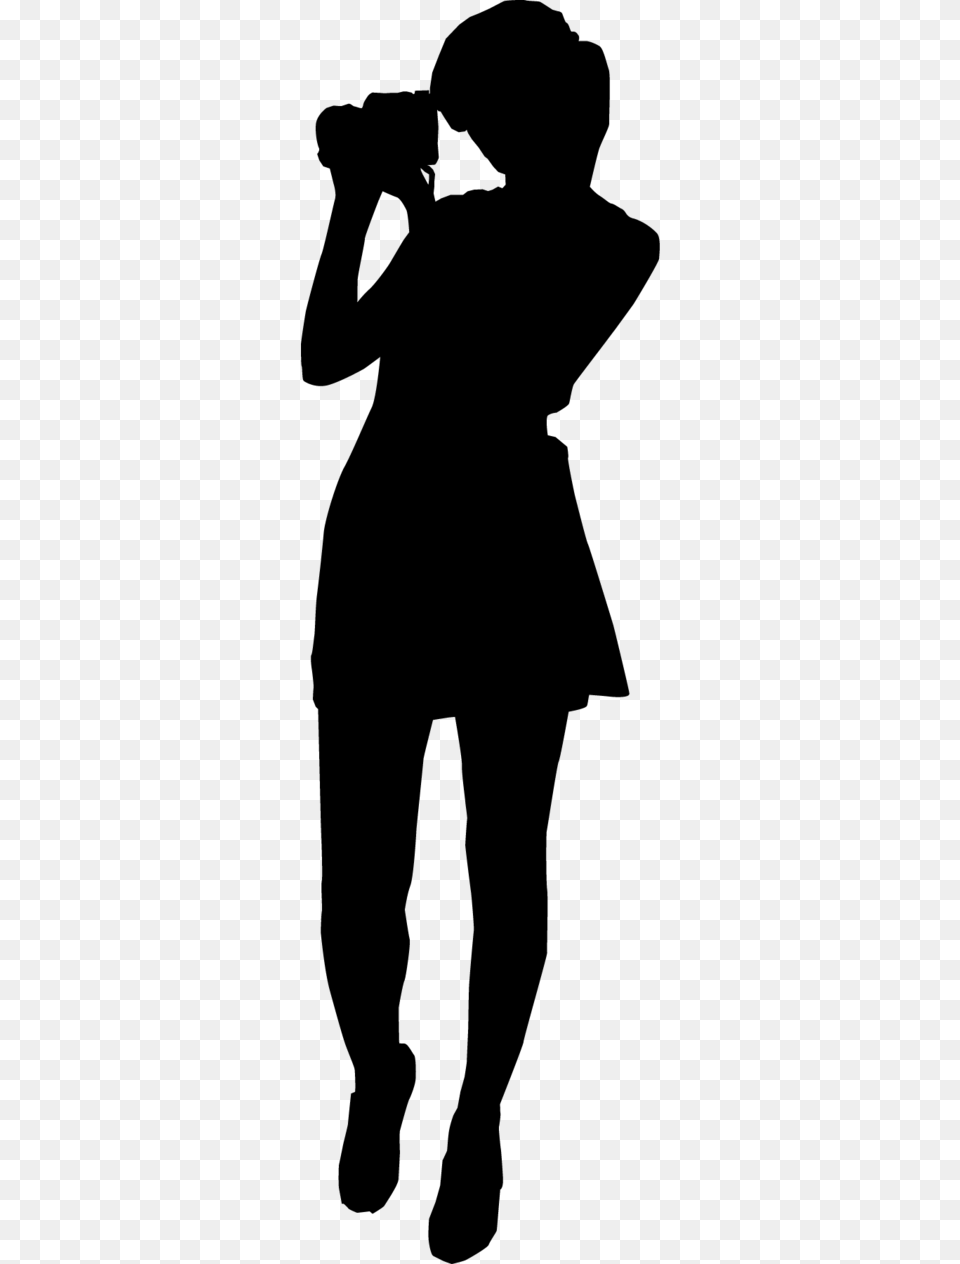 Female Silhouette Walking Away The Gallery, Gray Png Image